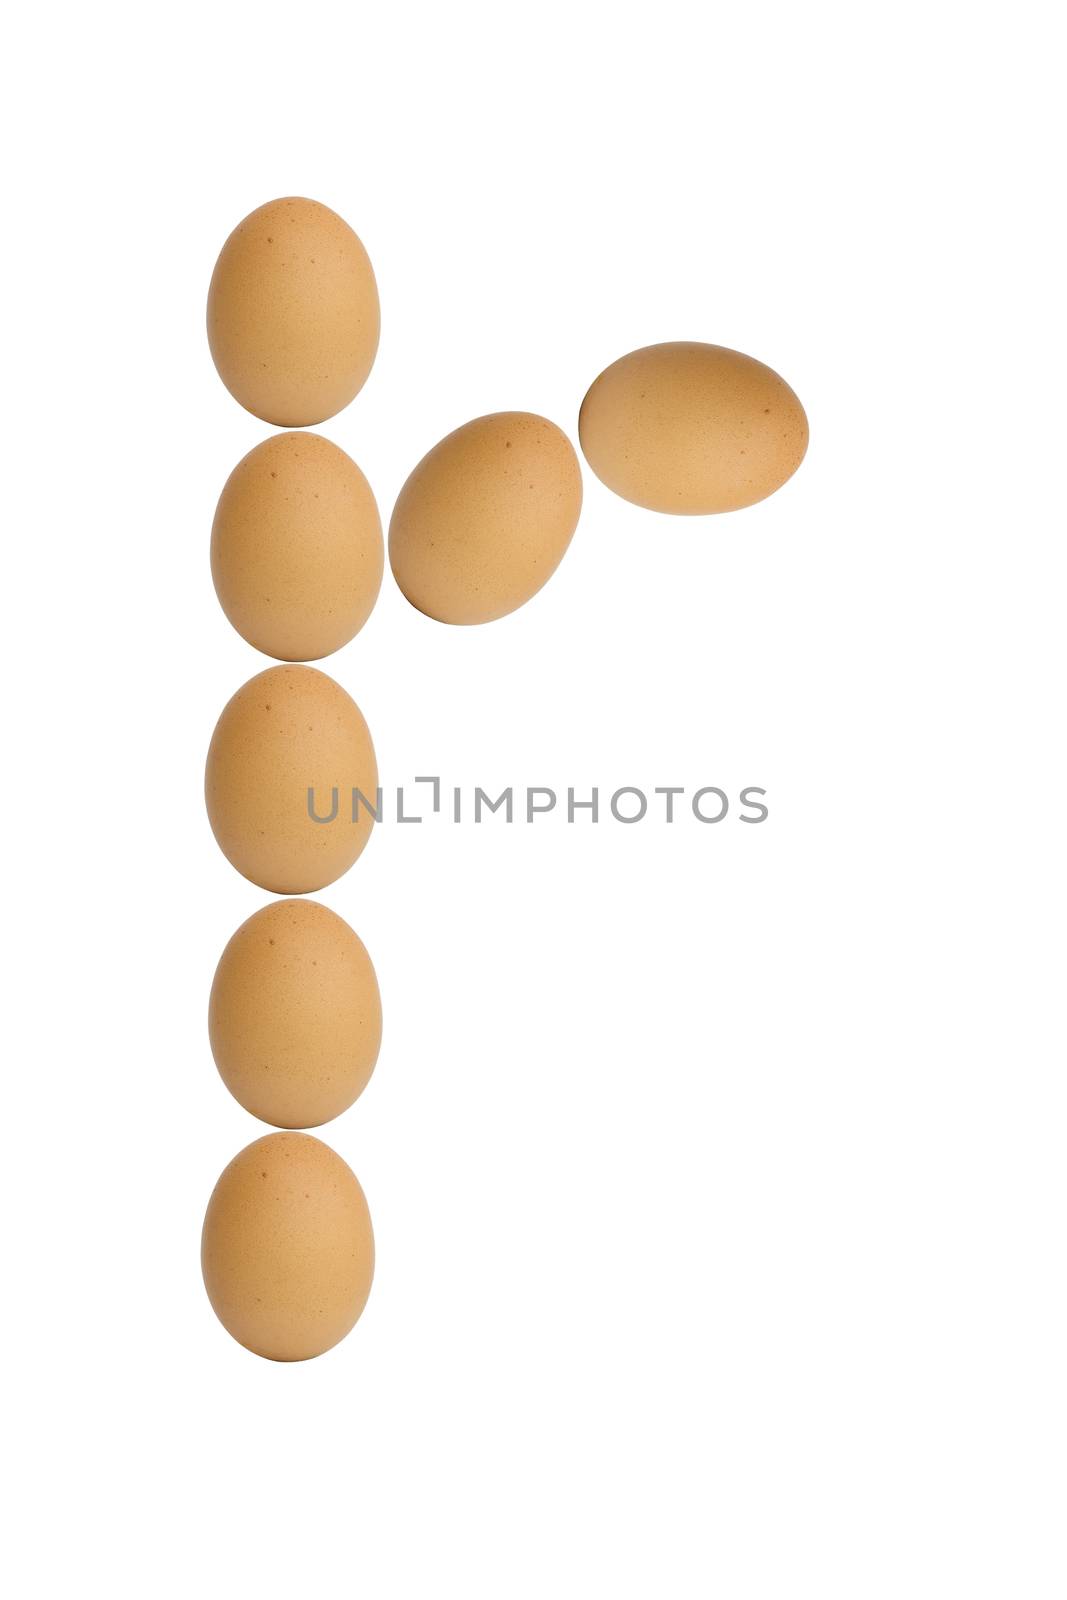 Alphabets  A to Z from brown eggs alphabet isolated on white bac by a3701027